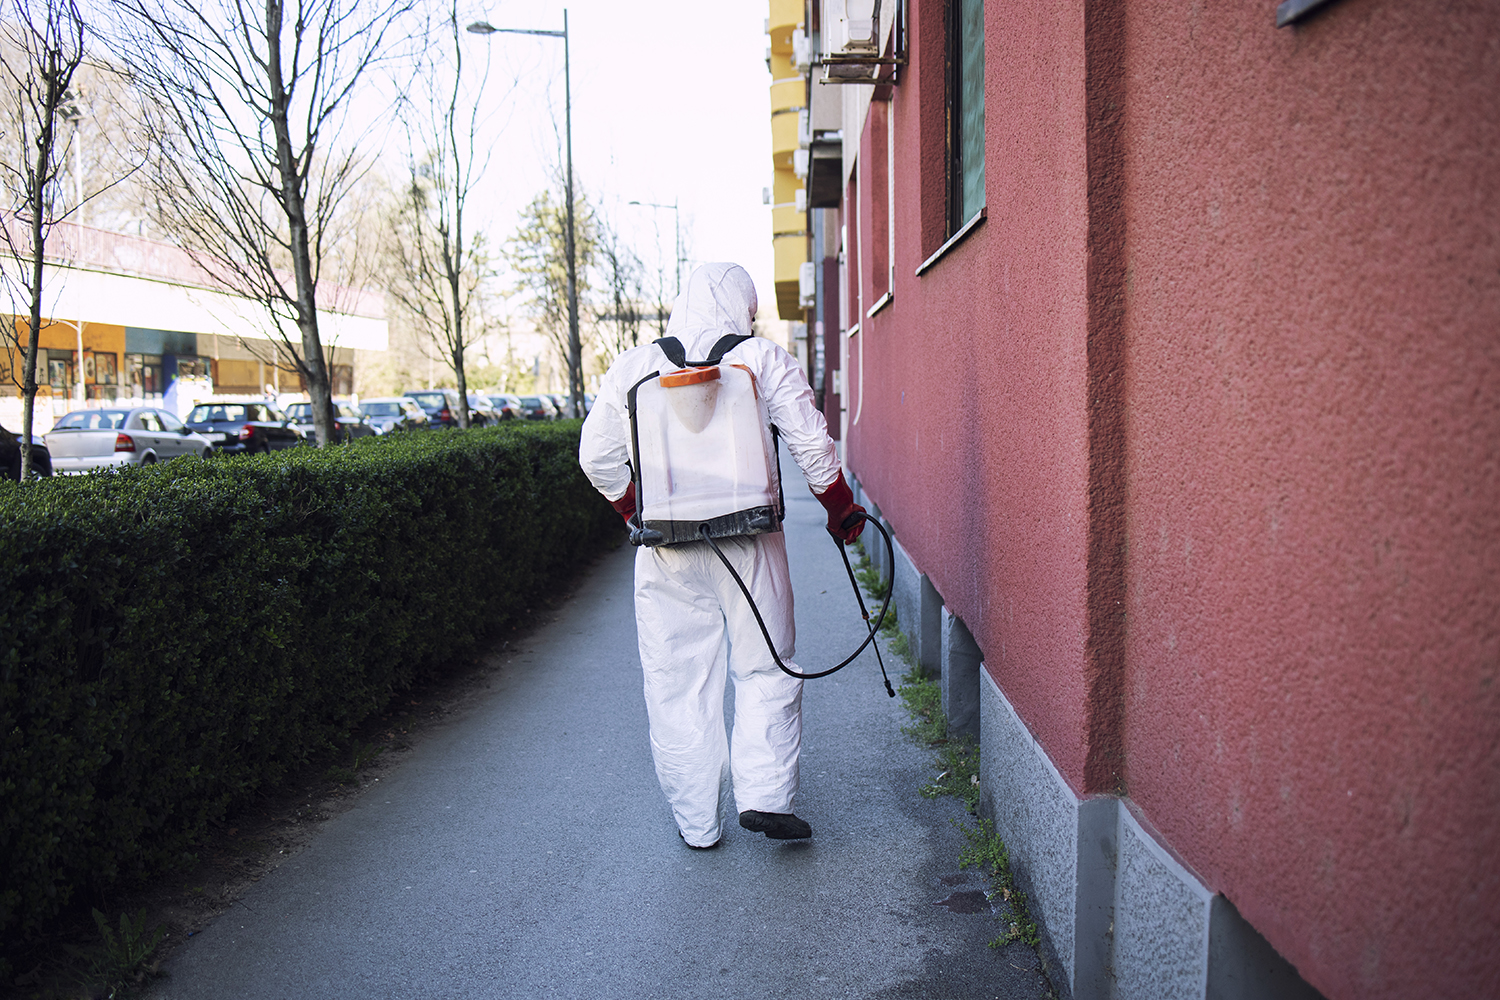 Unrecognizable worker in chemical protection suit spraying disinfectant on public surfaces.